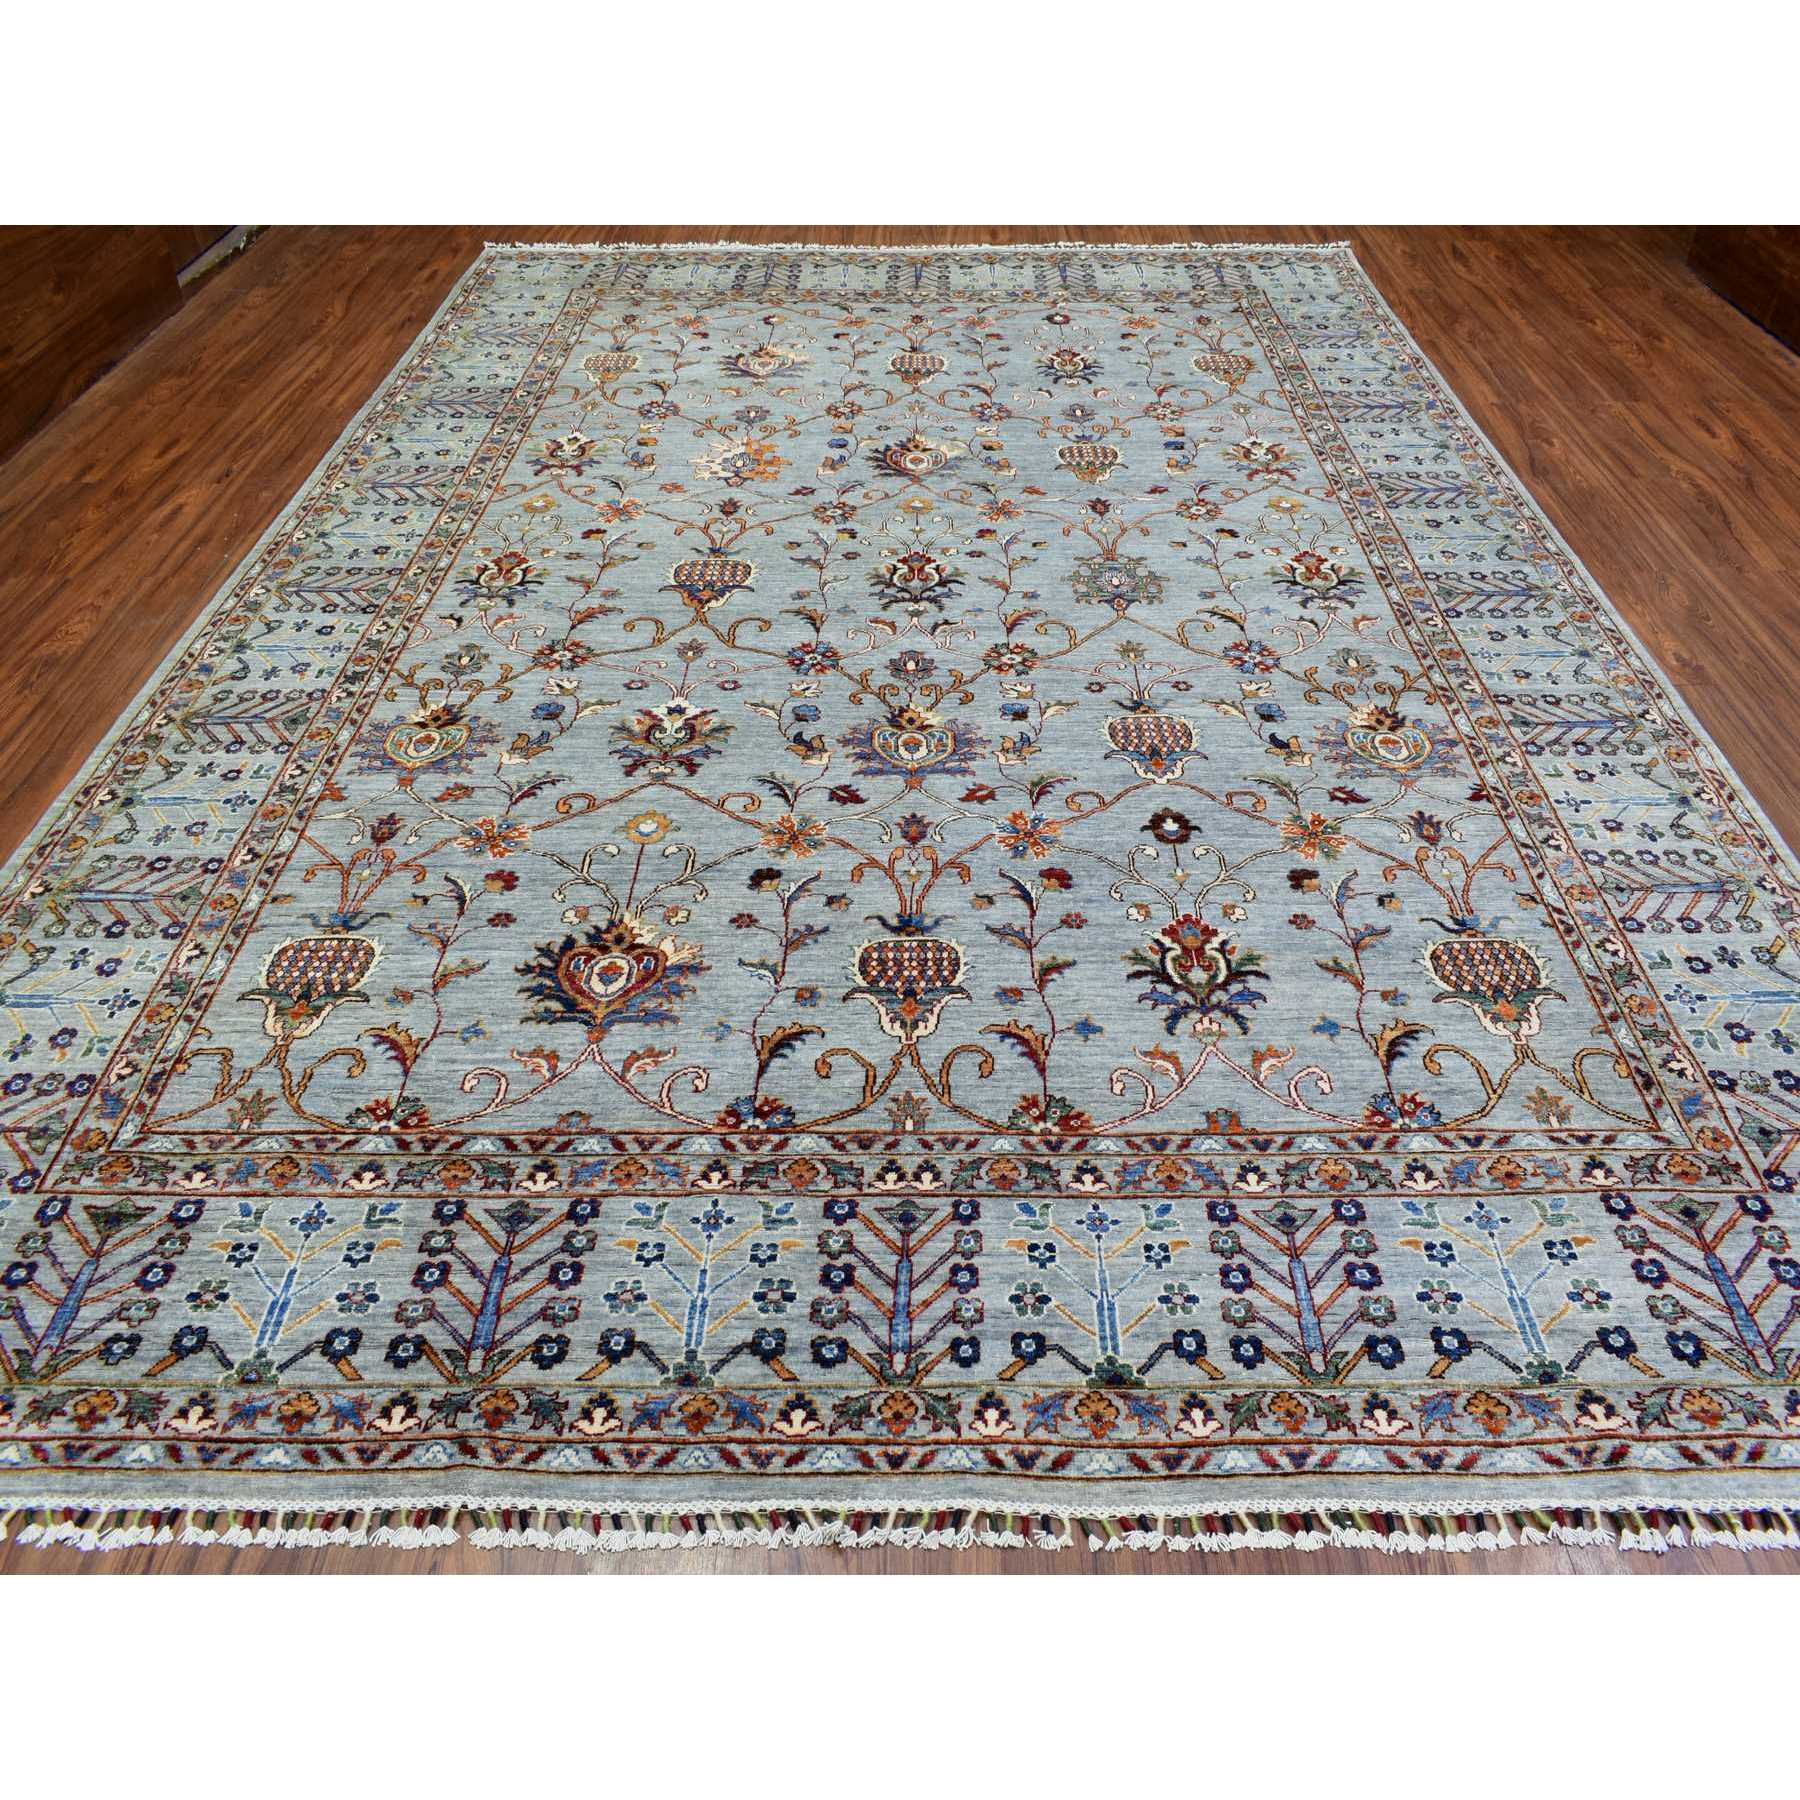 10'x13'10" Light Gray, Soft and Shiny Wool Hand Woven, Peshawar with Pomegranates Sultani Scroll Design Natural Dyes Densely Weave, Oriental Rug 